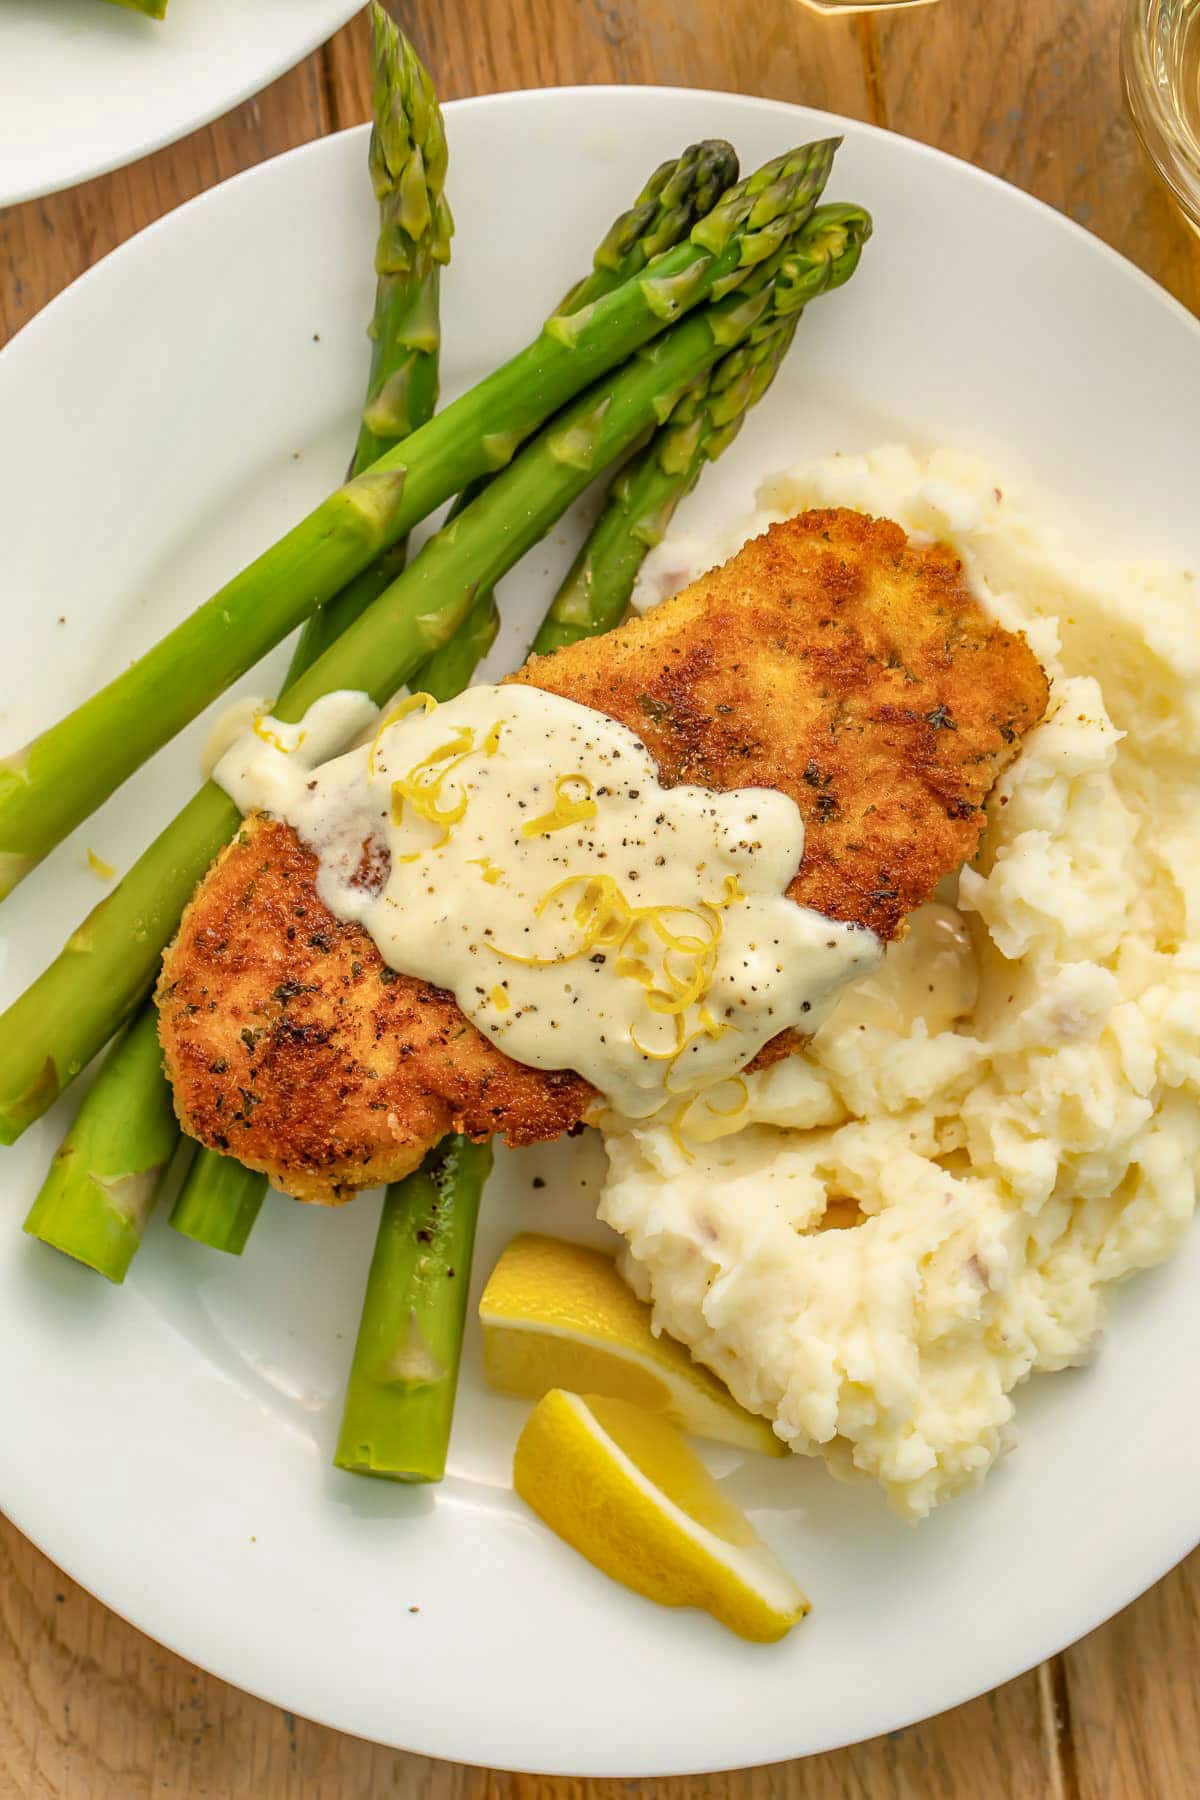 Copycat chicken costoletta on a white plate with mashed potatoes, green asparagus, and a creamy sauce.